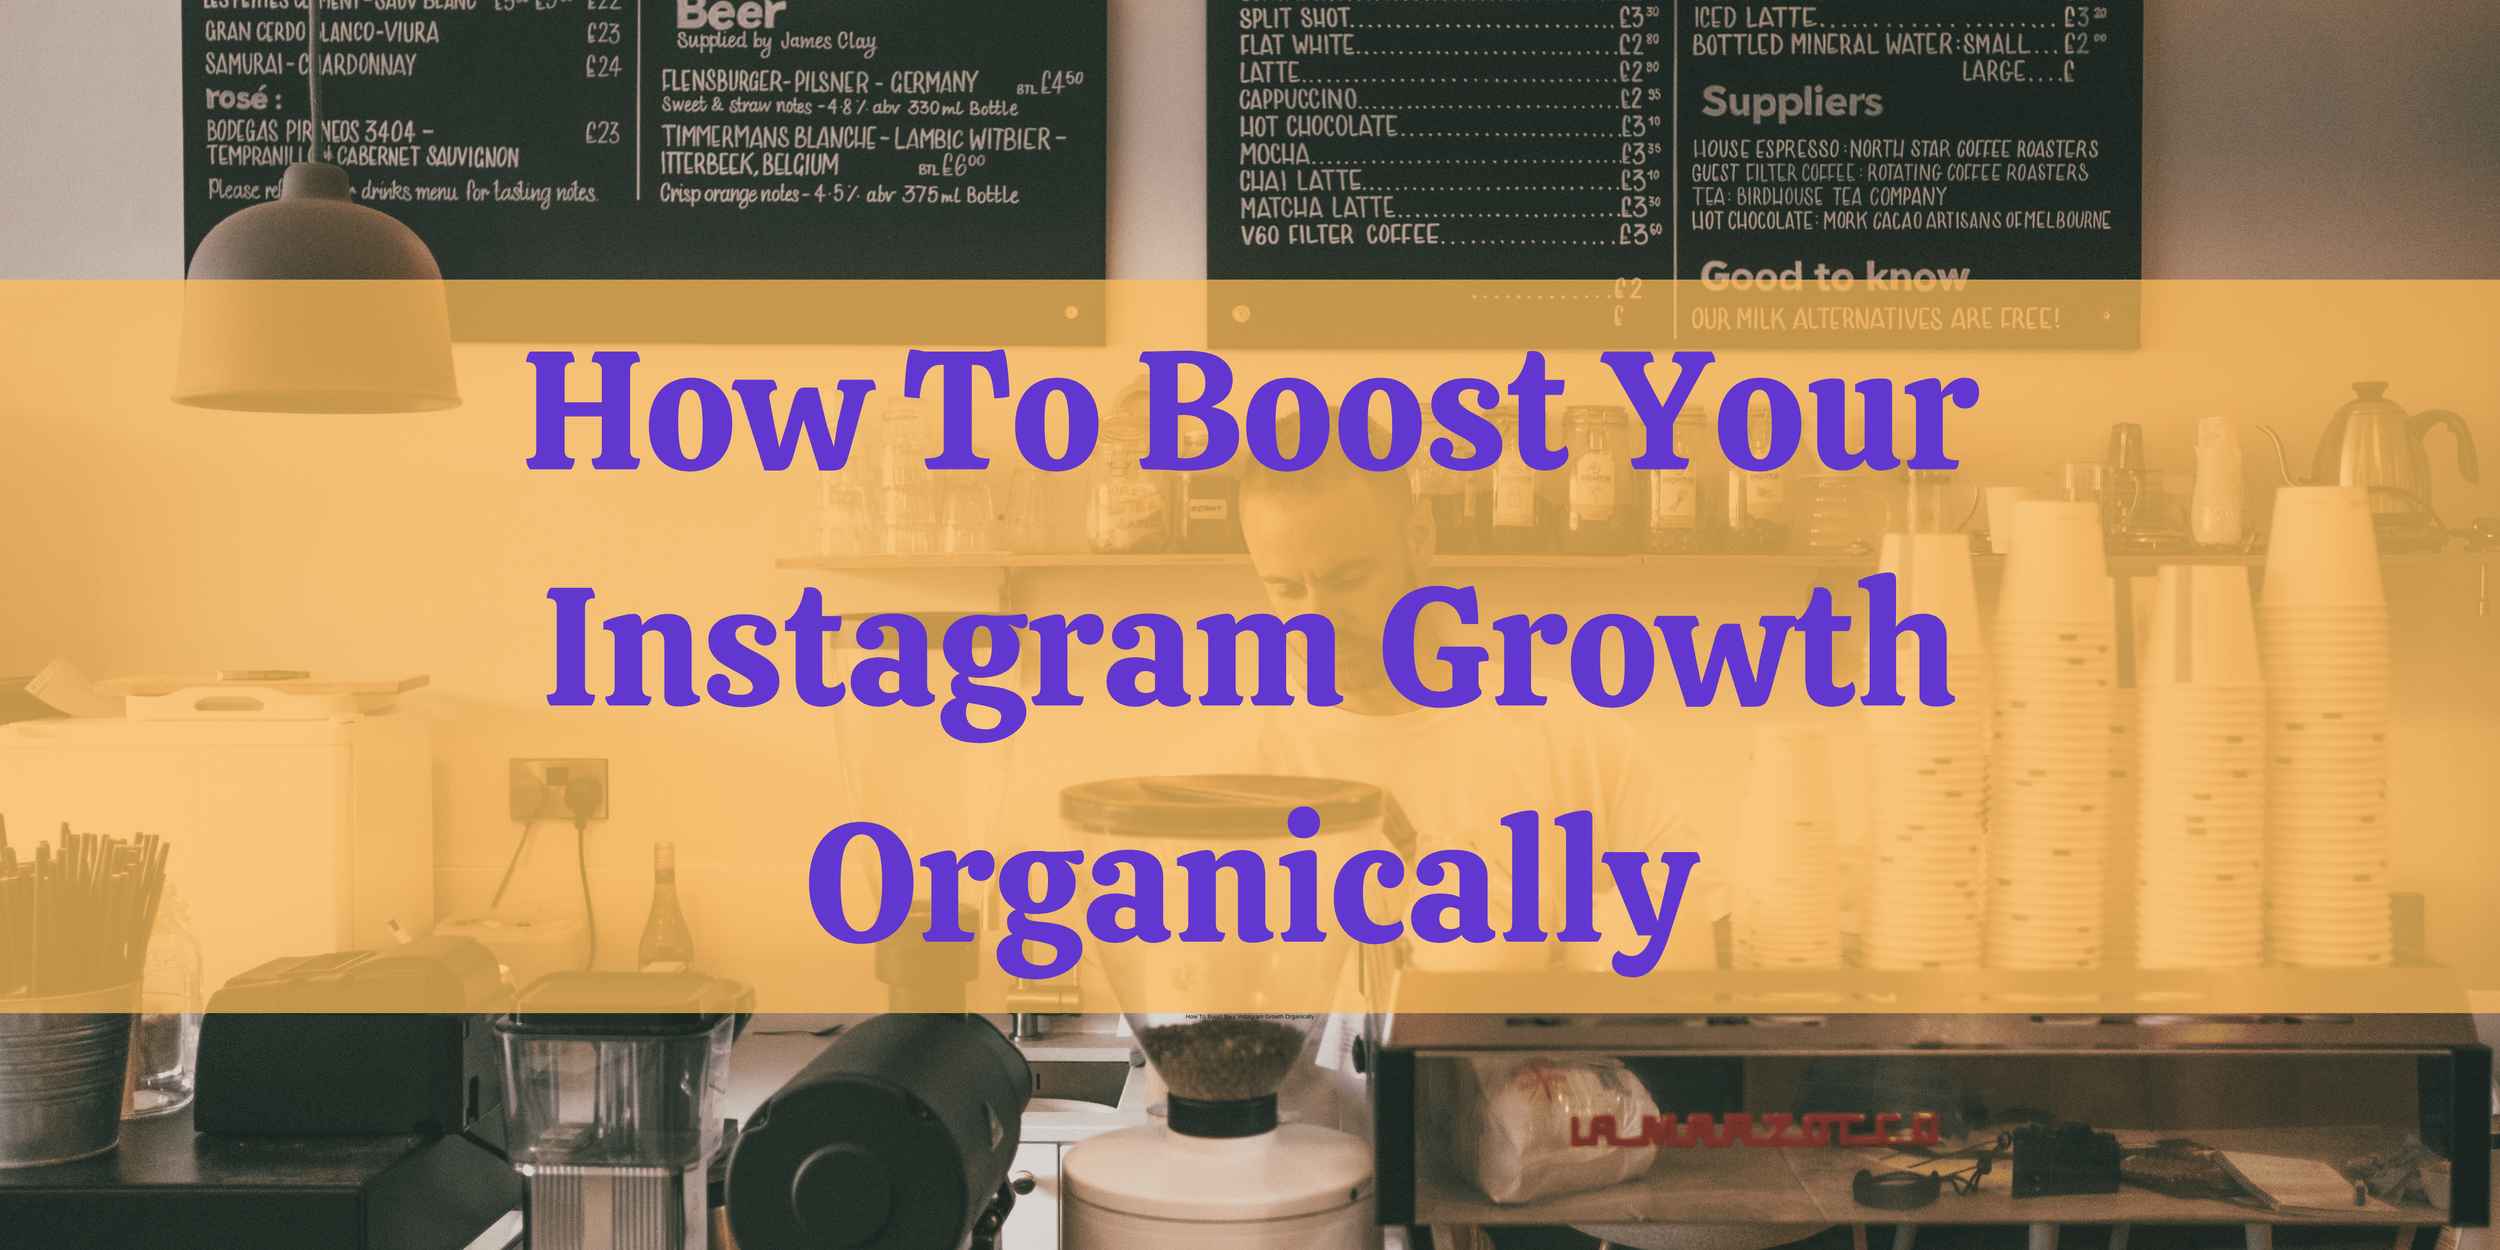 How to boost your Instagram growth organically